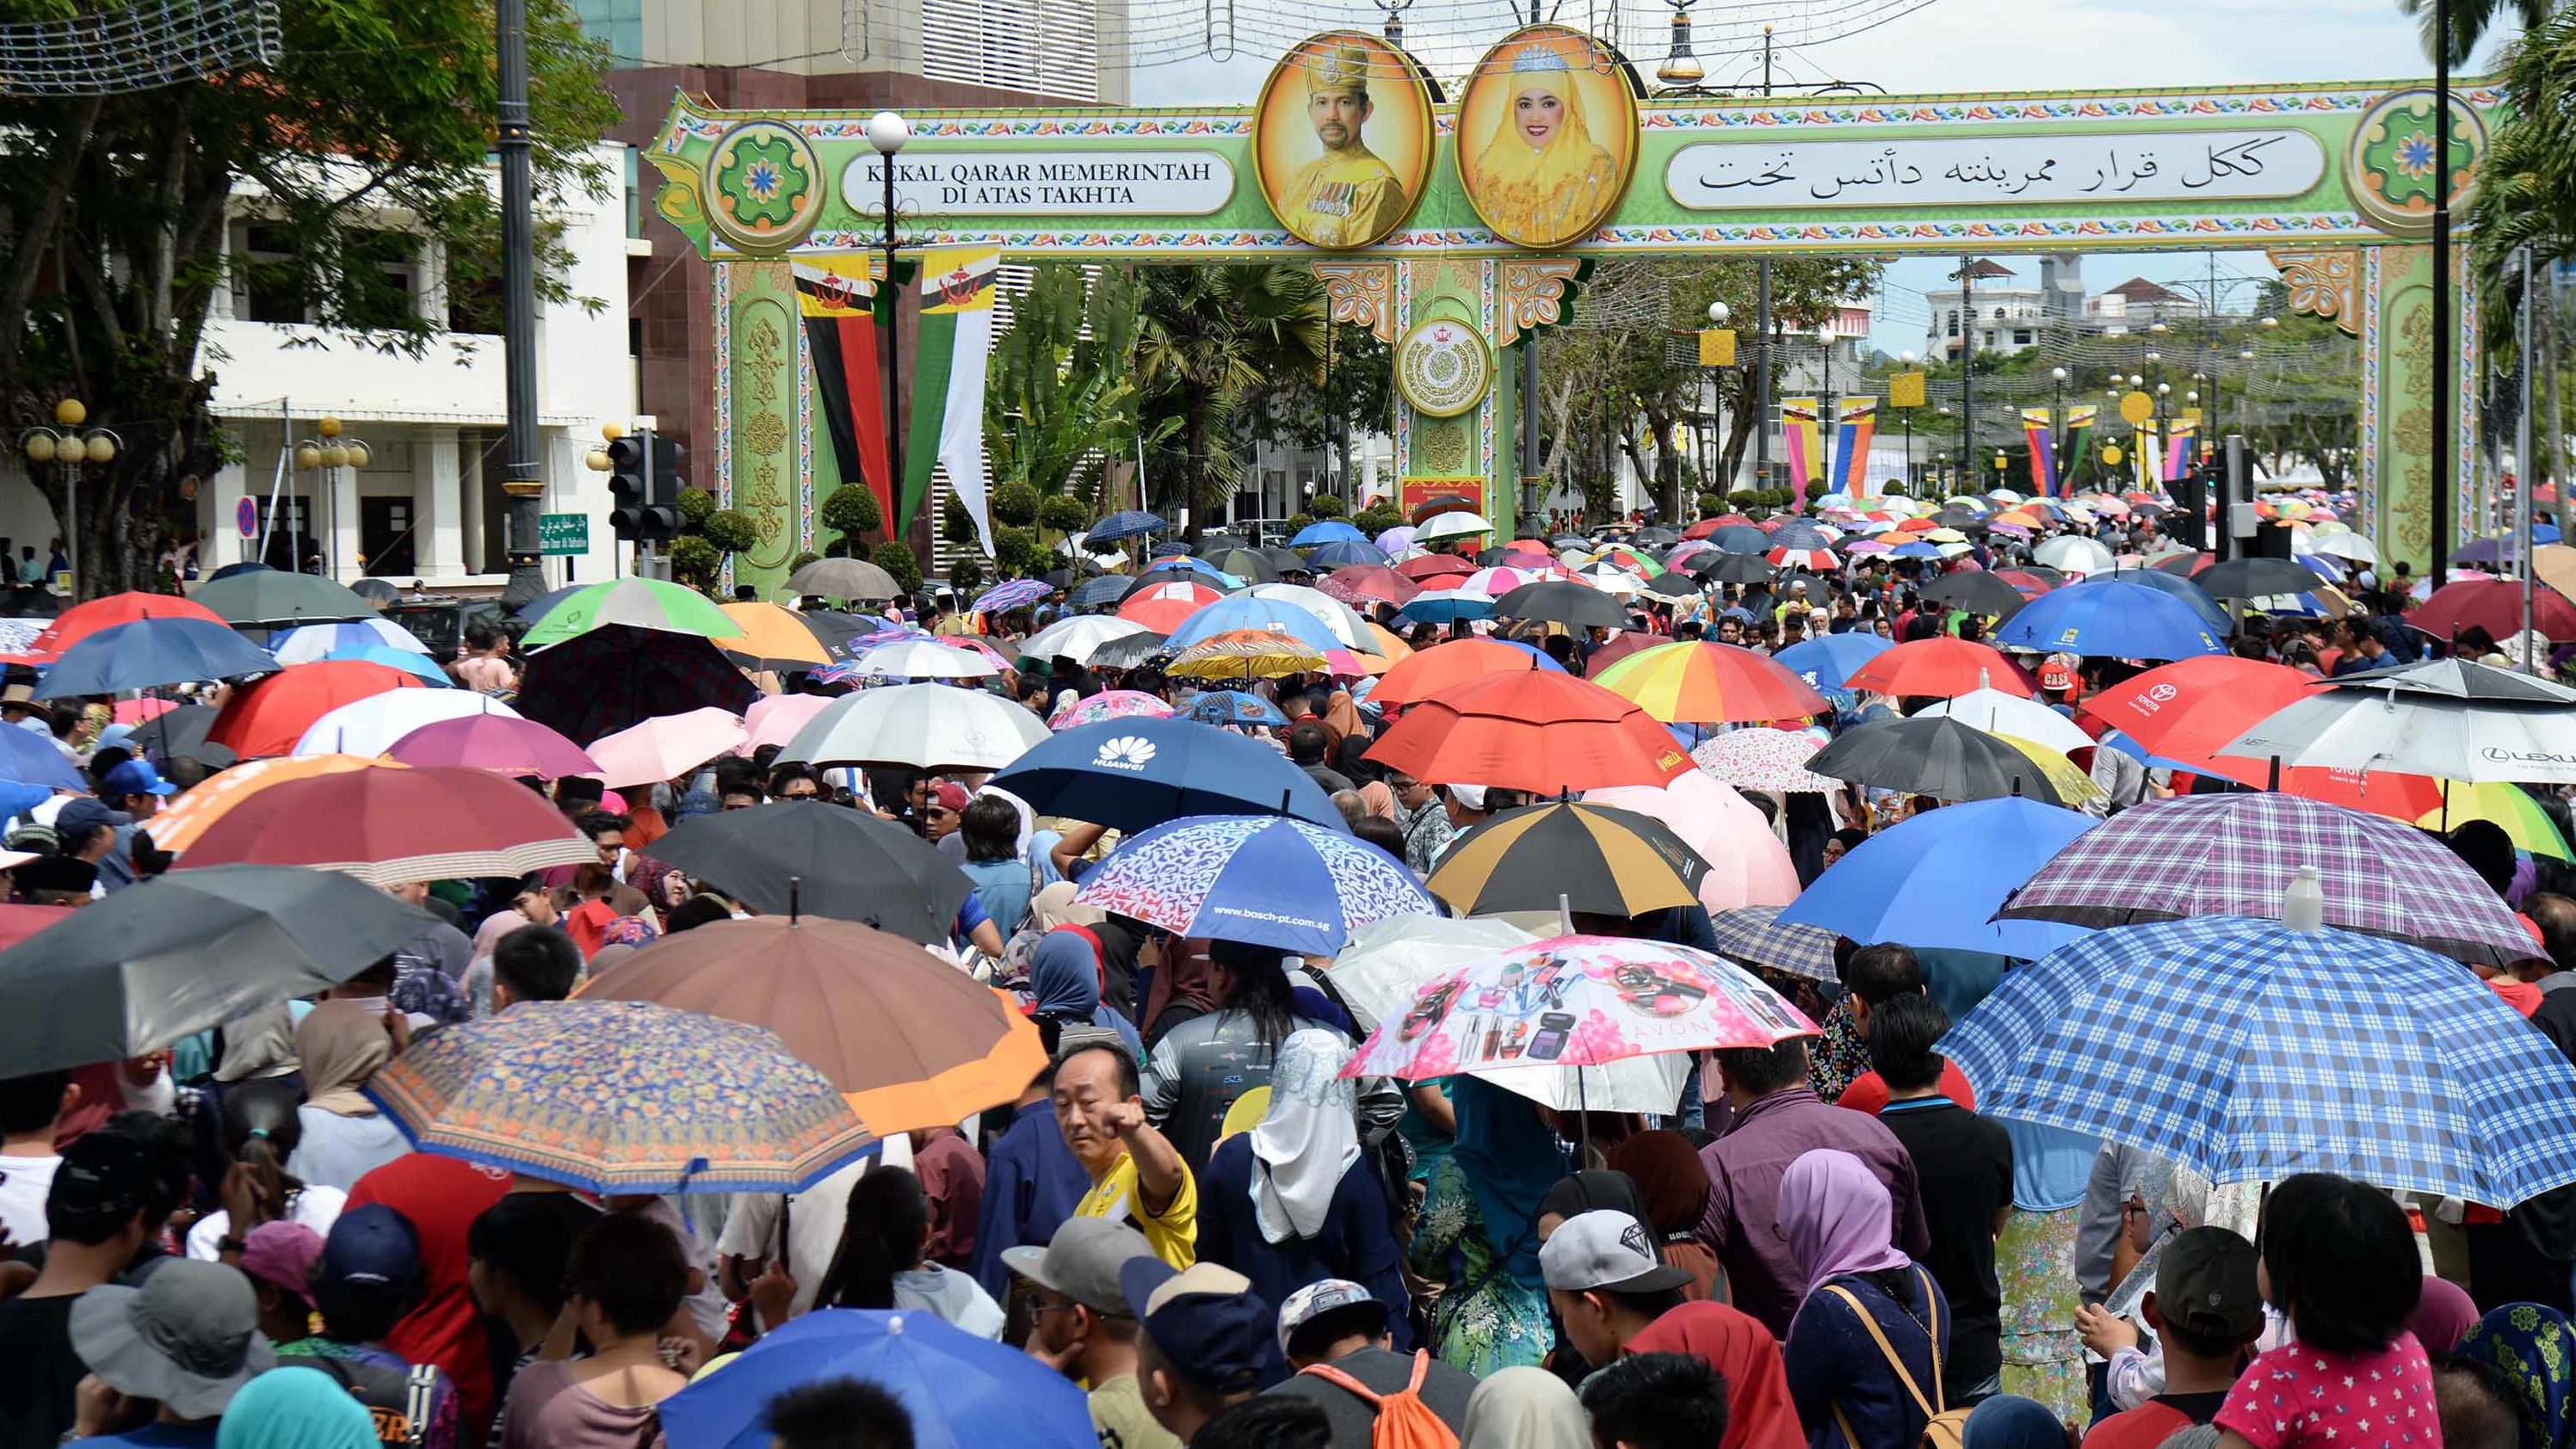 People wait under umbrellas for the royal chariot at jubilee celebrations.